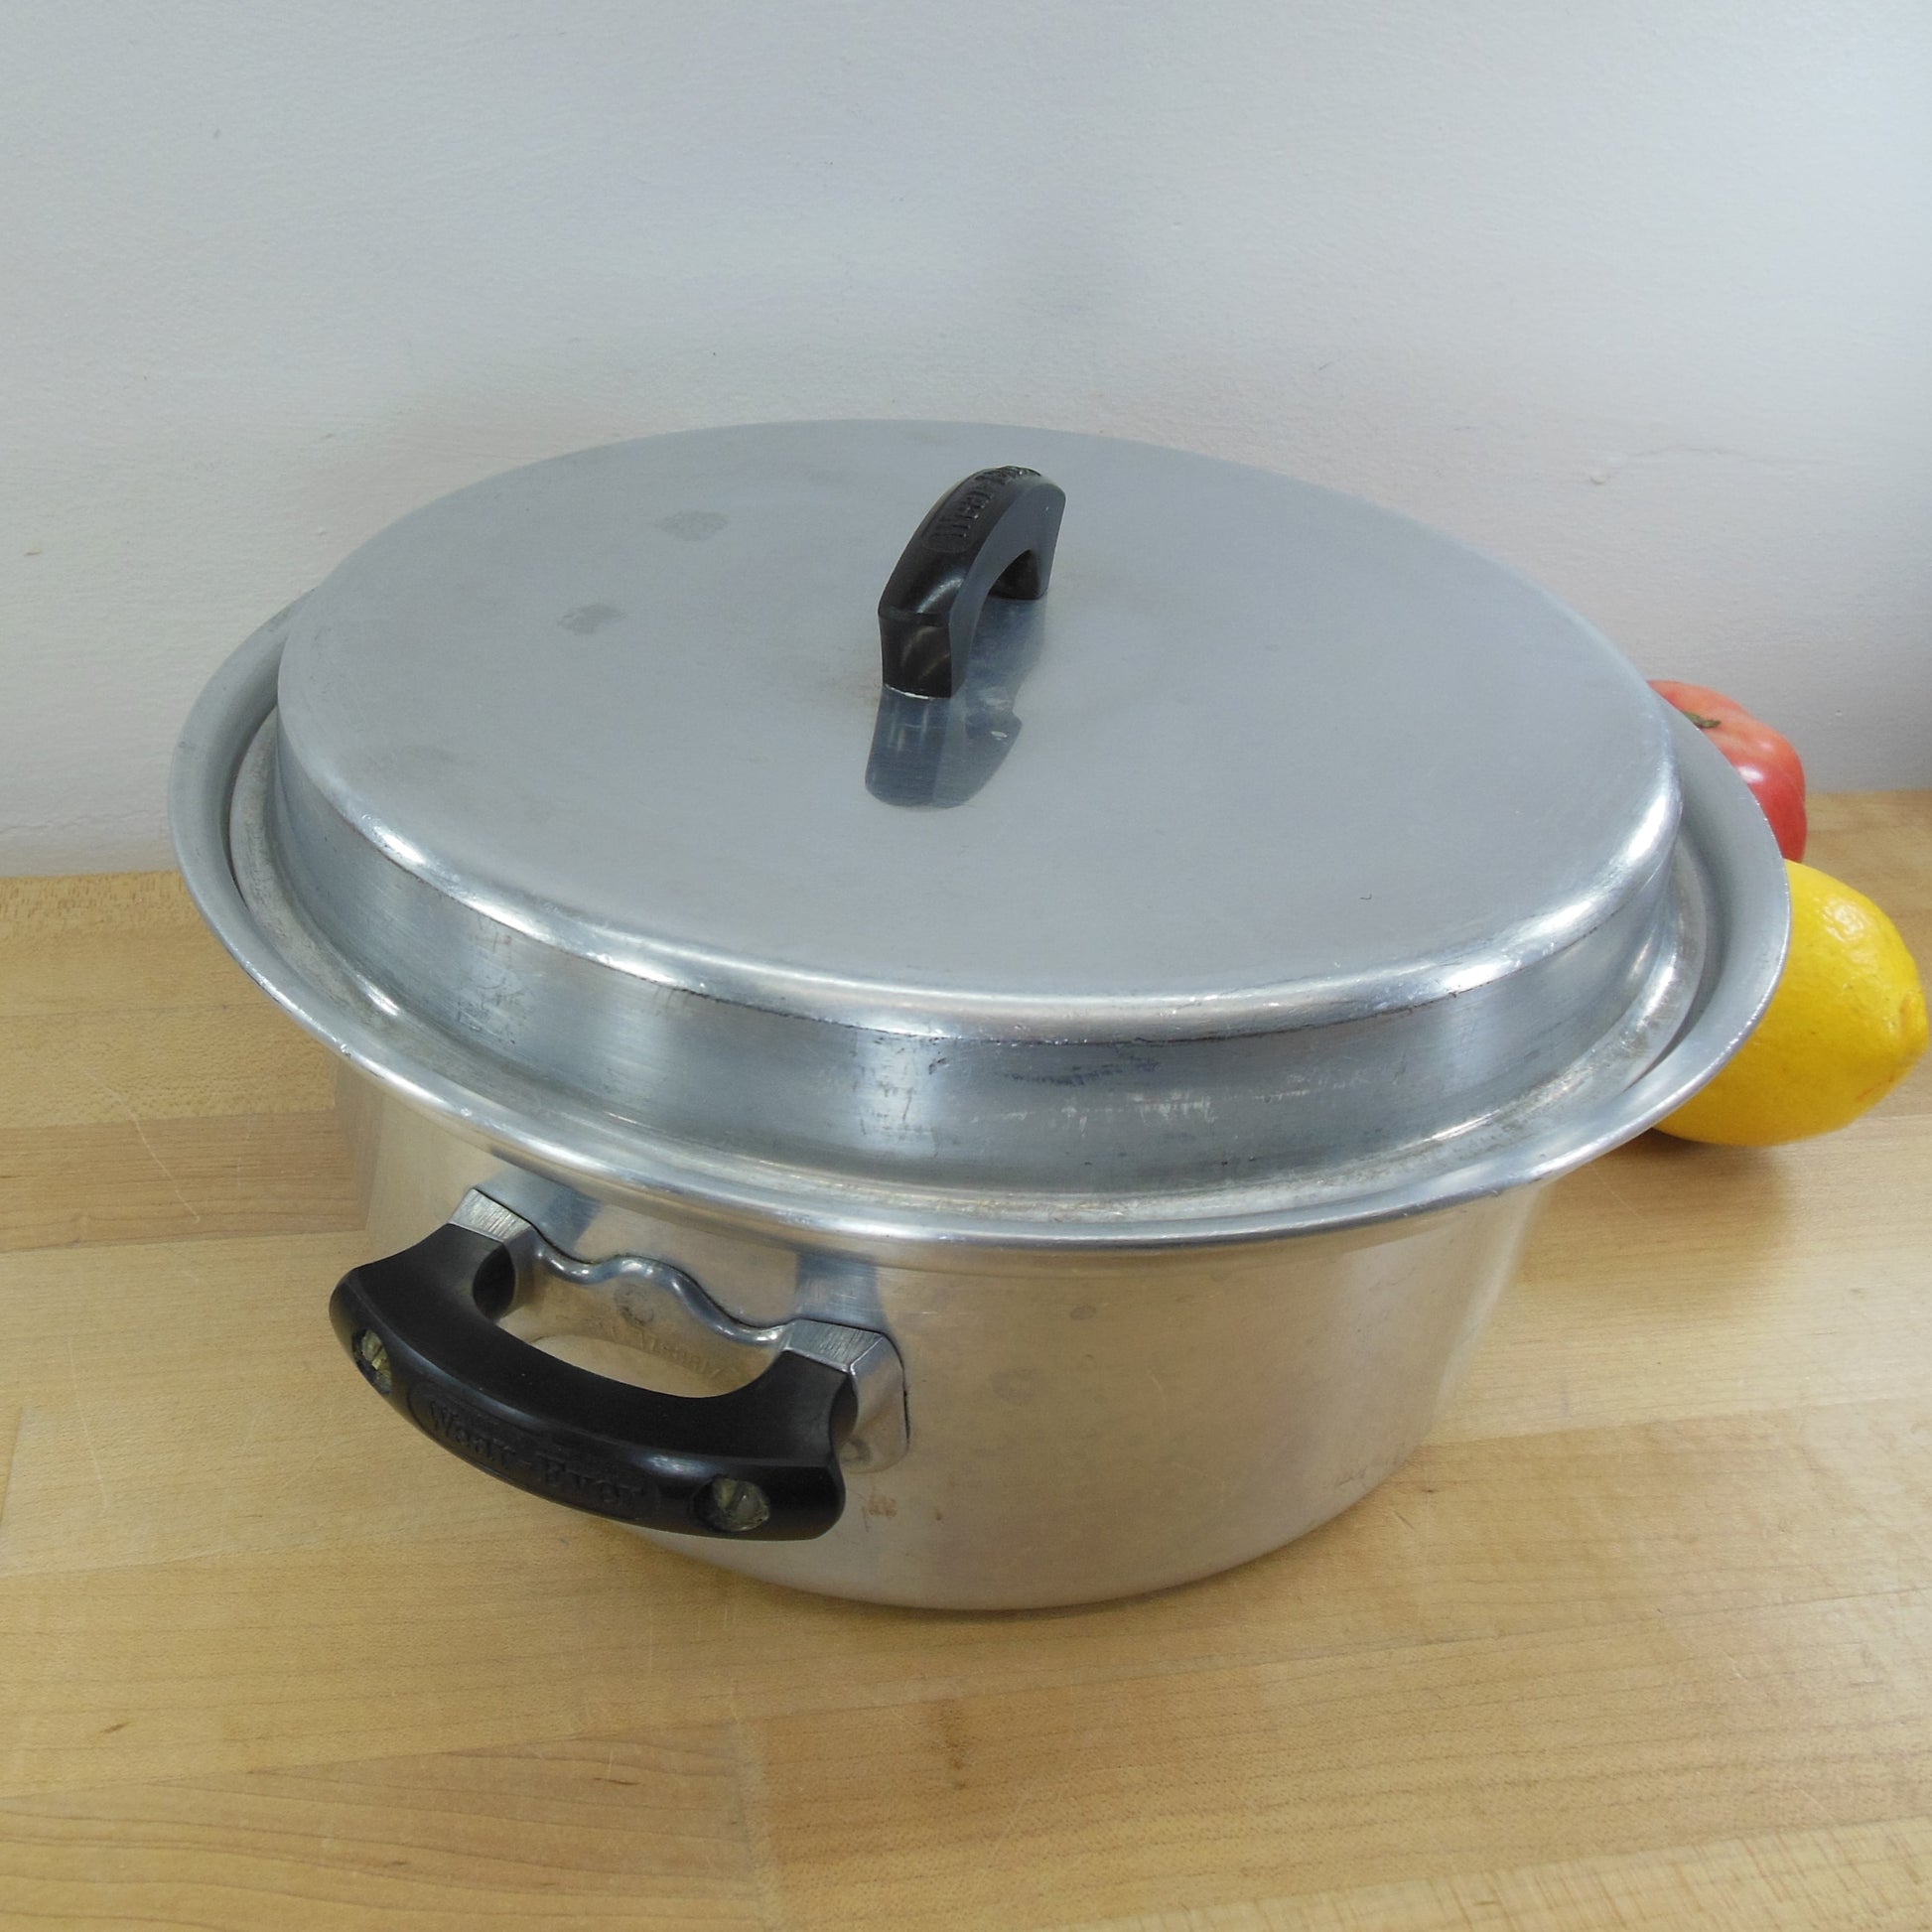 VINTAGE WEAR EVER ALUMINUM DUTCH OVEN/STOCK POT 4 QT NO 824 WITH LID MADE  IN USA